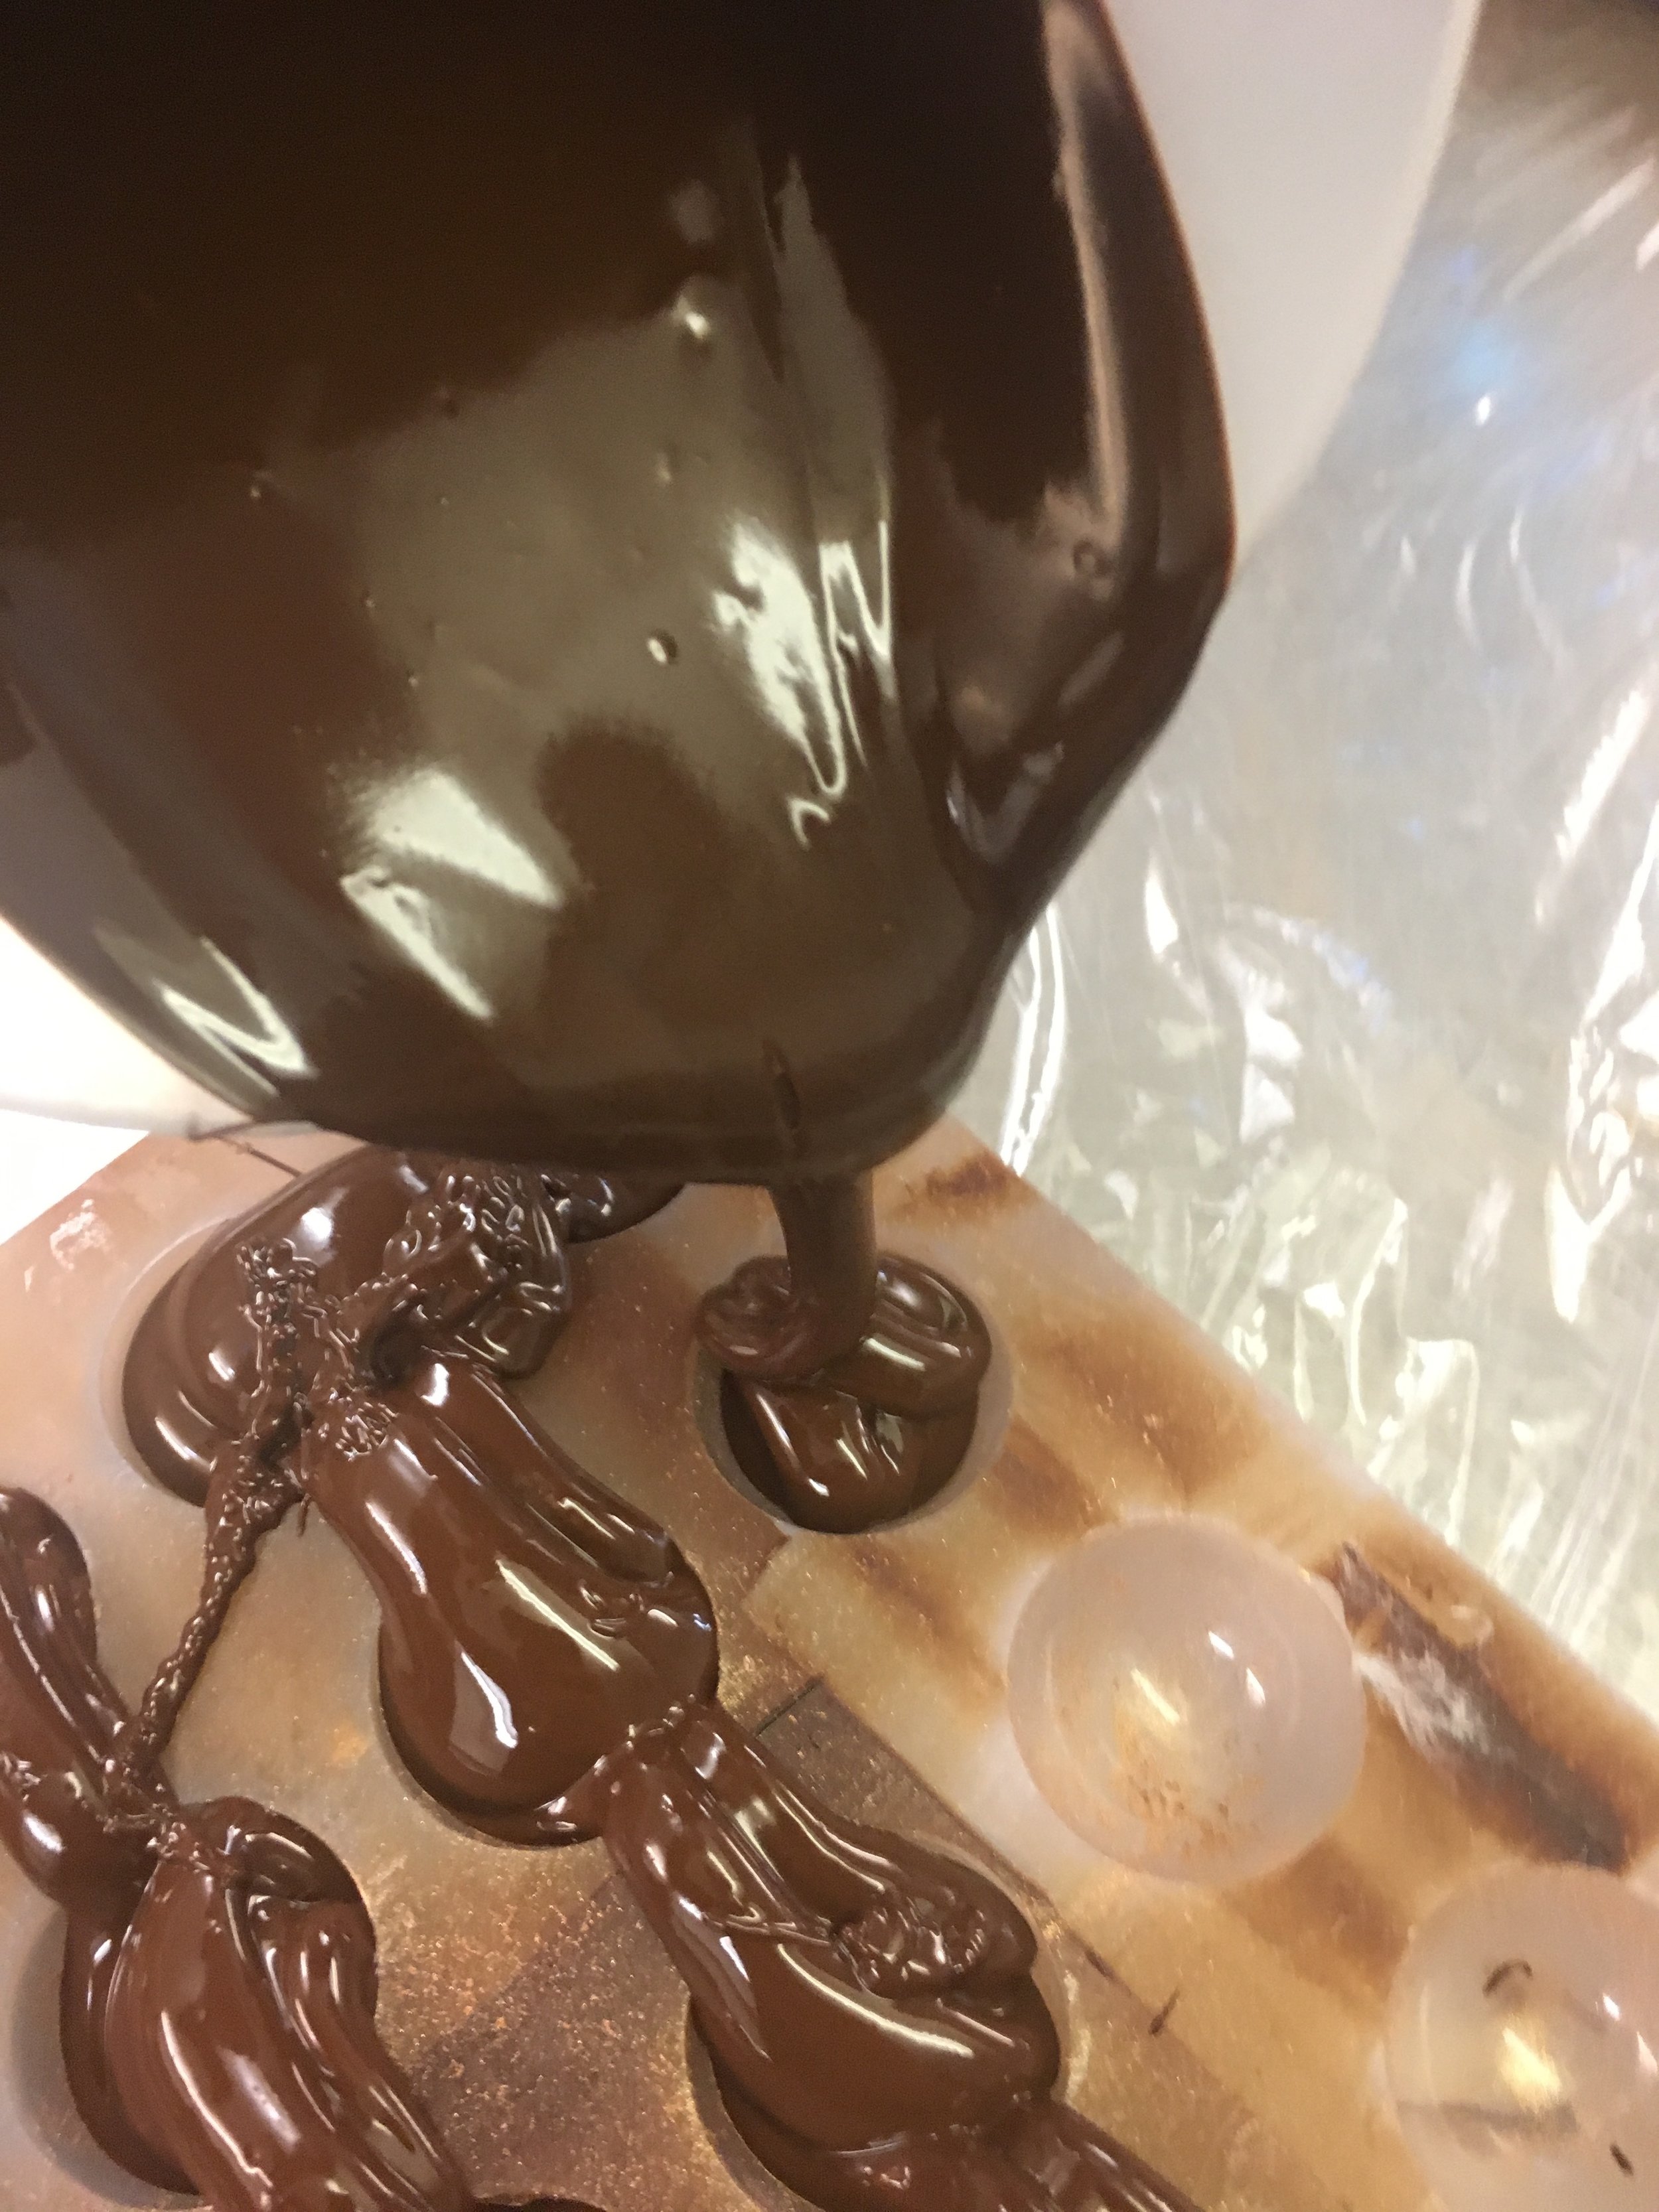 Pouring chocolateinto moulds